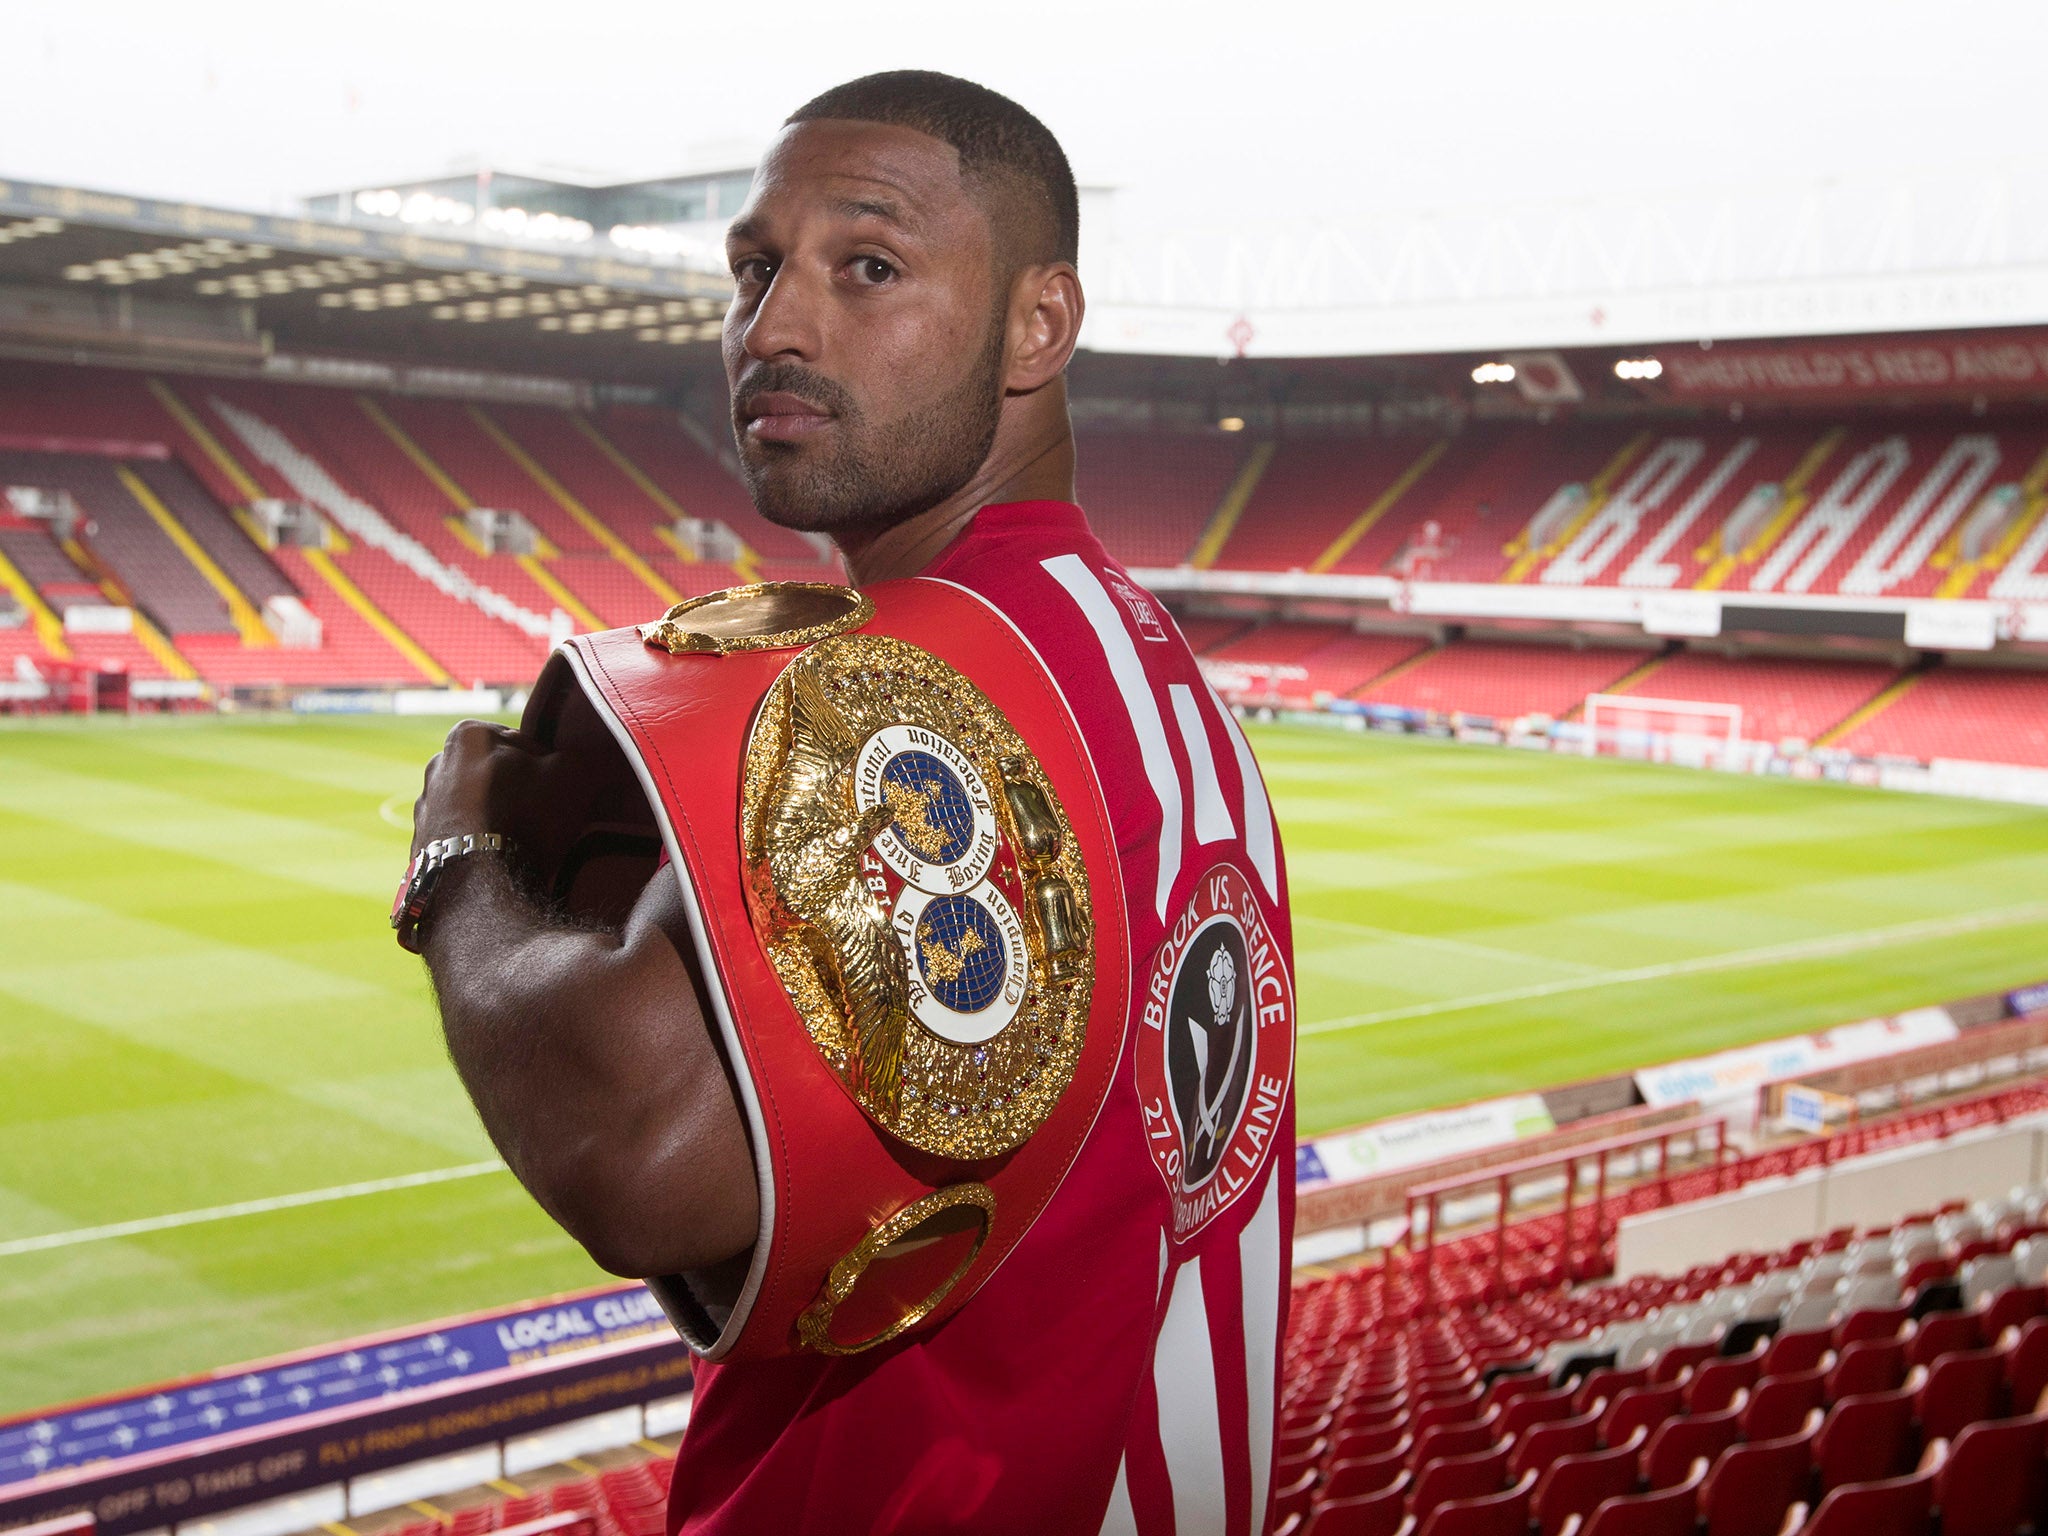 Brook's return will be staged at Bramall Lane, home of his beloved Sheffield United